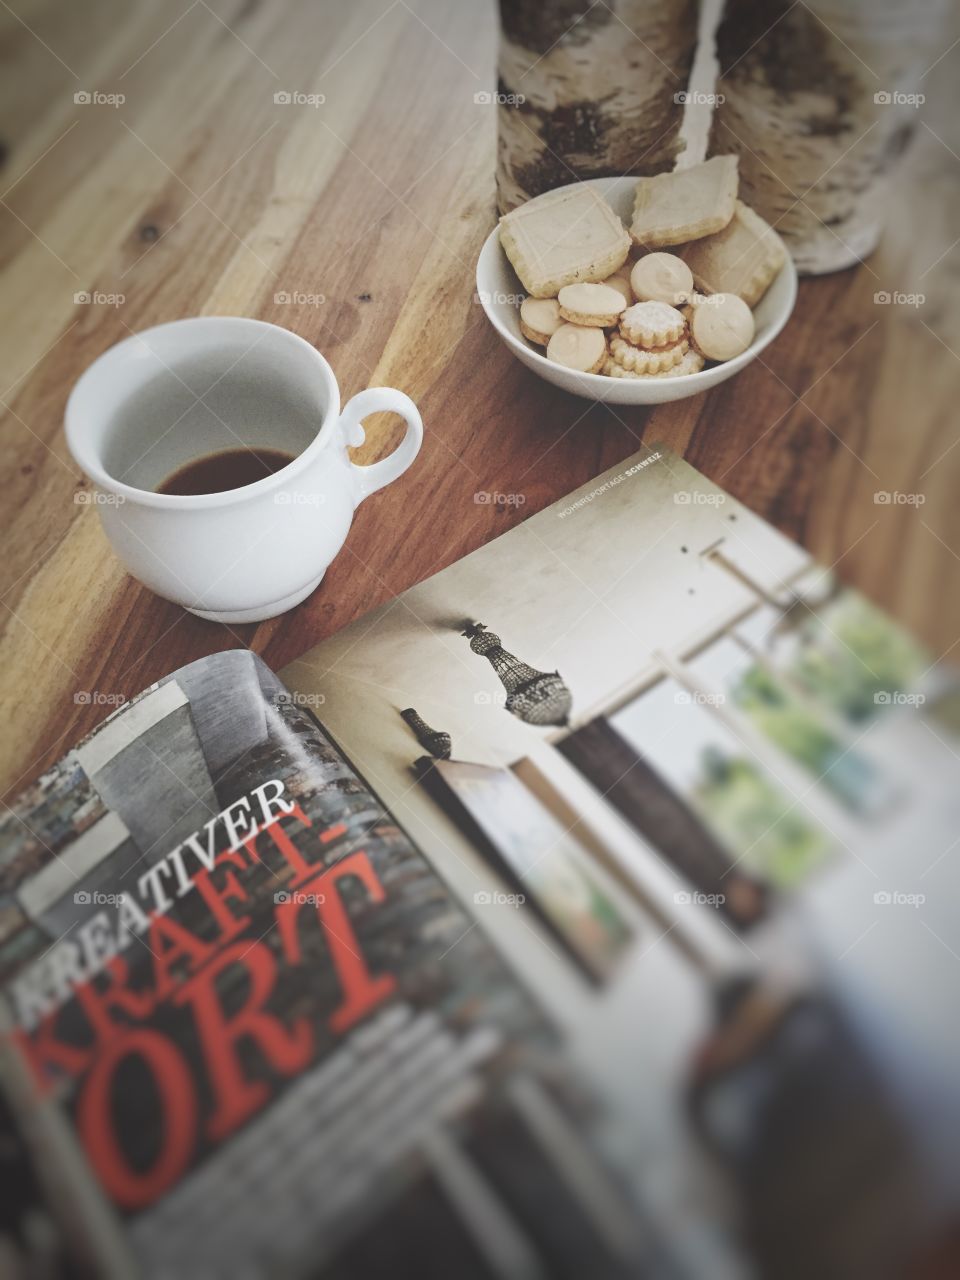 Me time on a misty Sunday afternoon - an inspiring magazine, a cup of coffee in my favorite mug and some cookies. Could life be better?